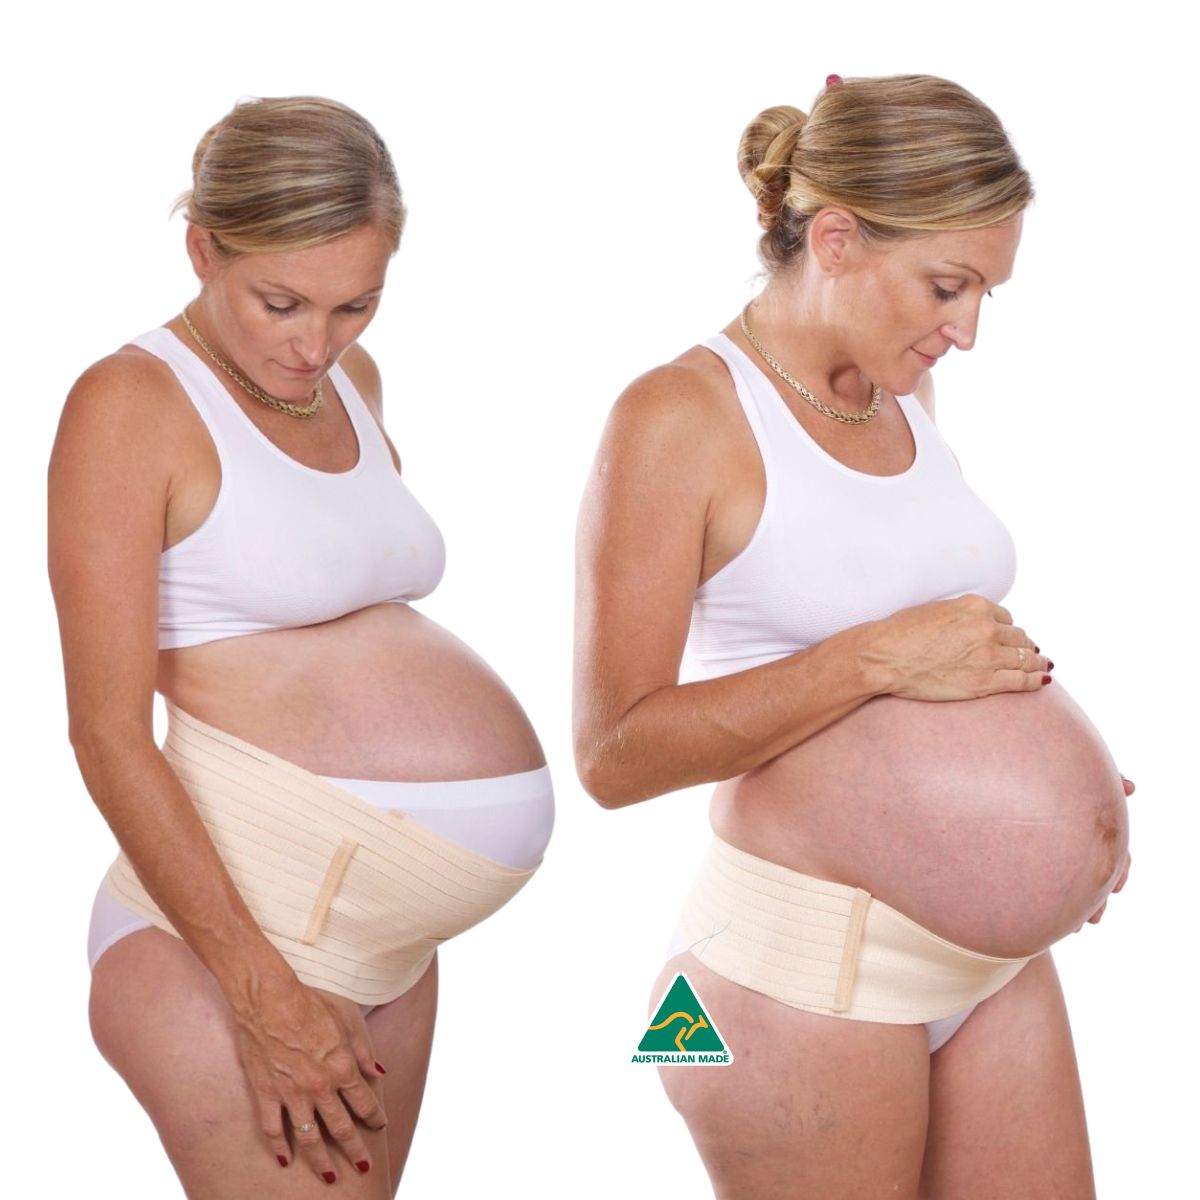 3-in-1 Belly Band & Sacroiliac Pelvic Belt Twin Pack - Belly Bands